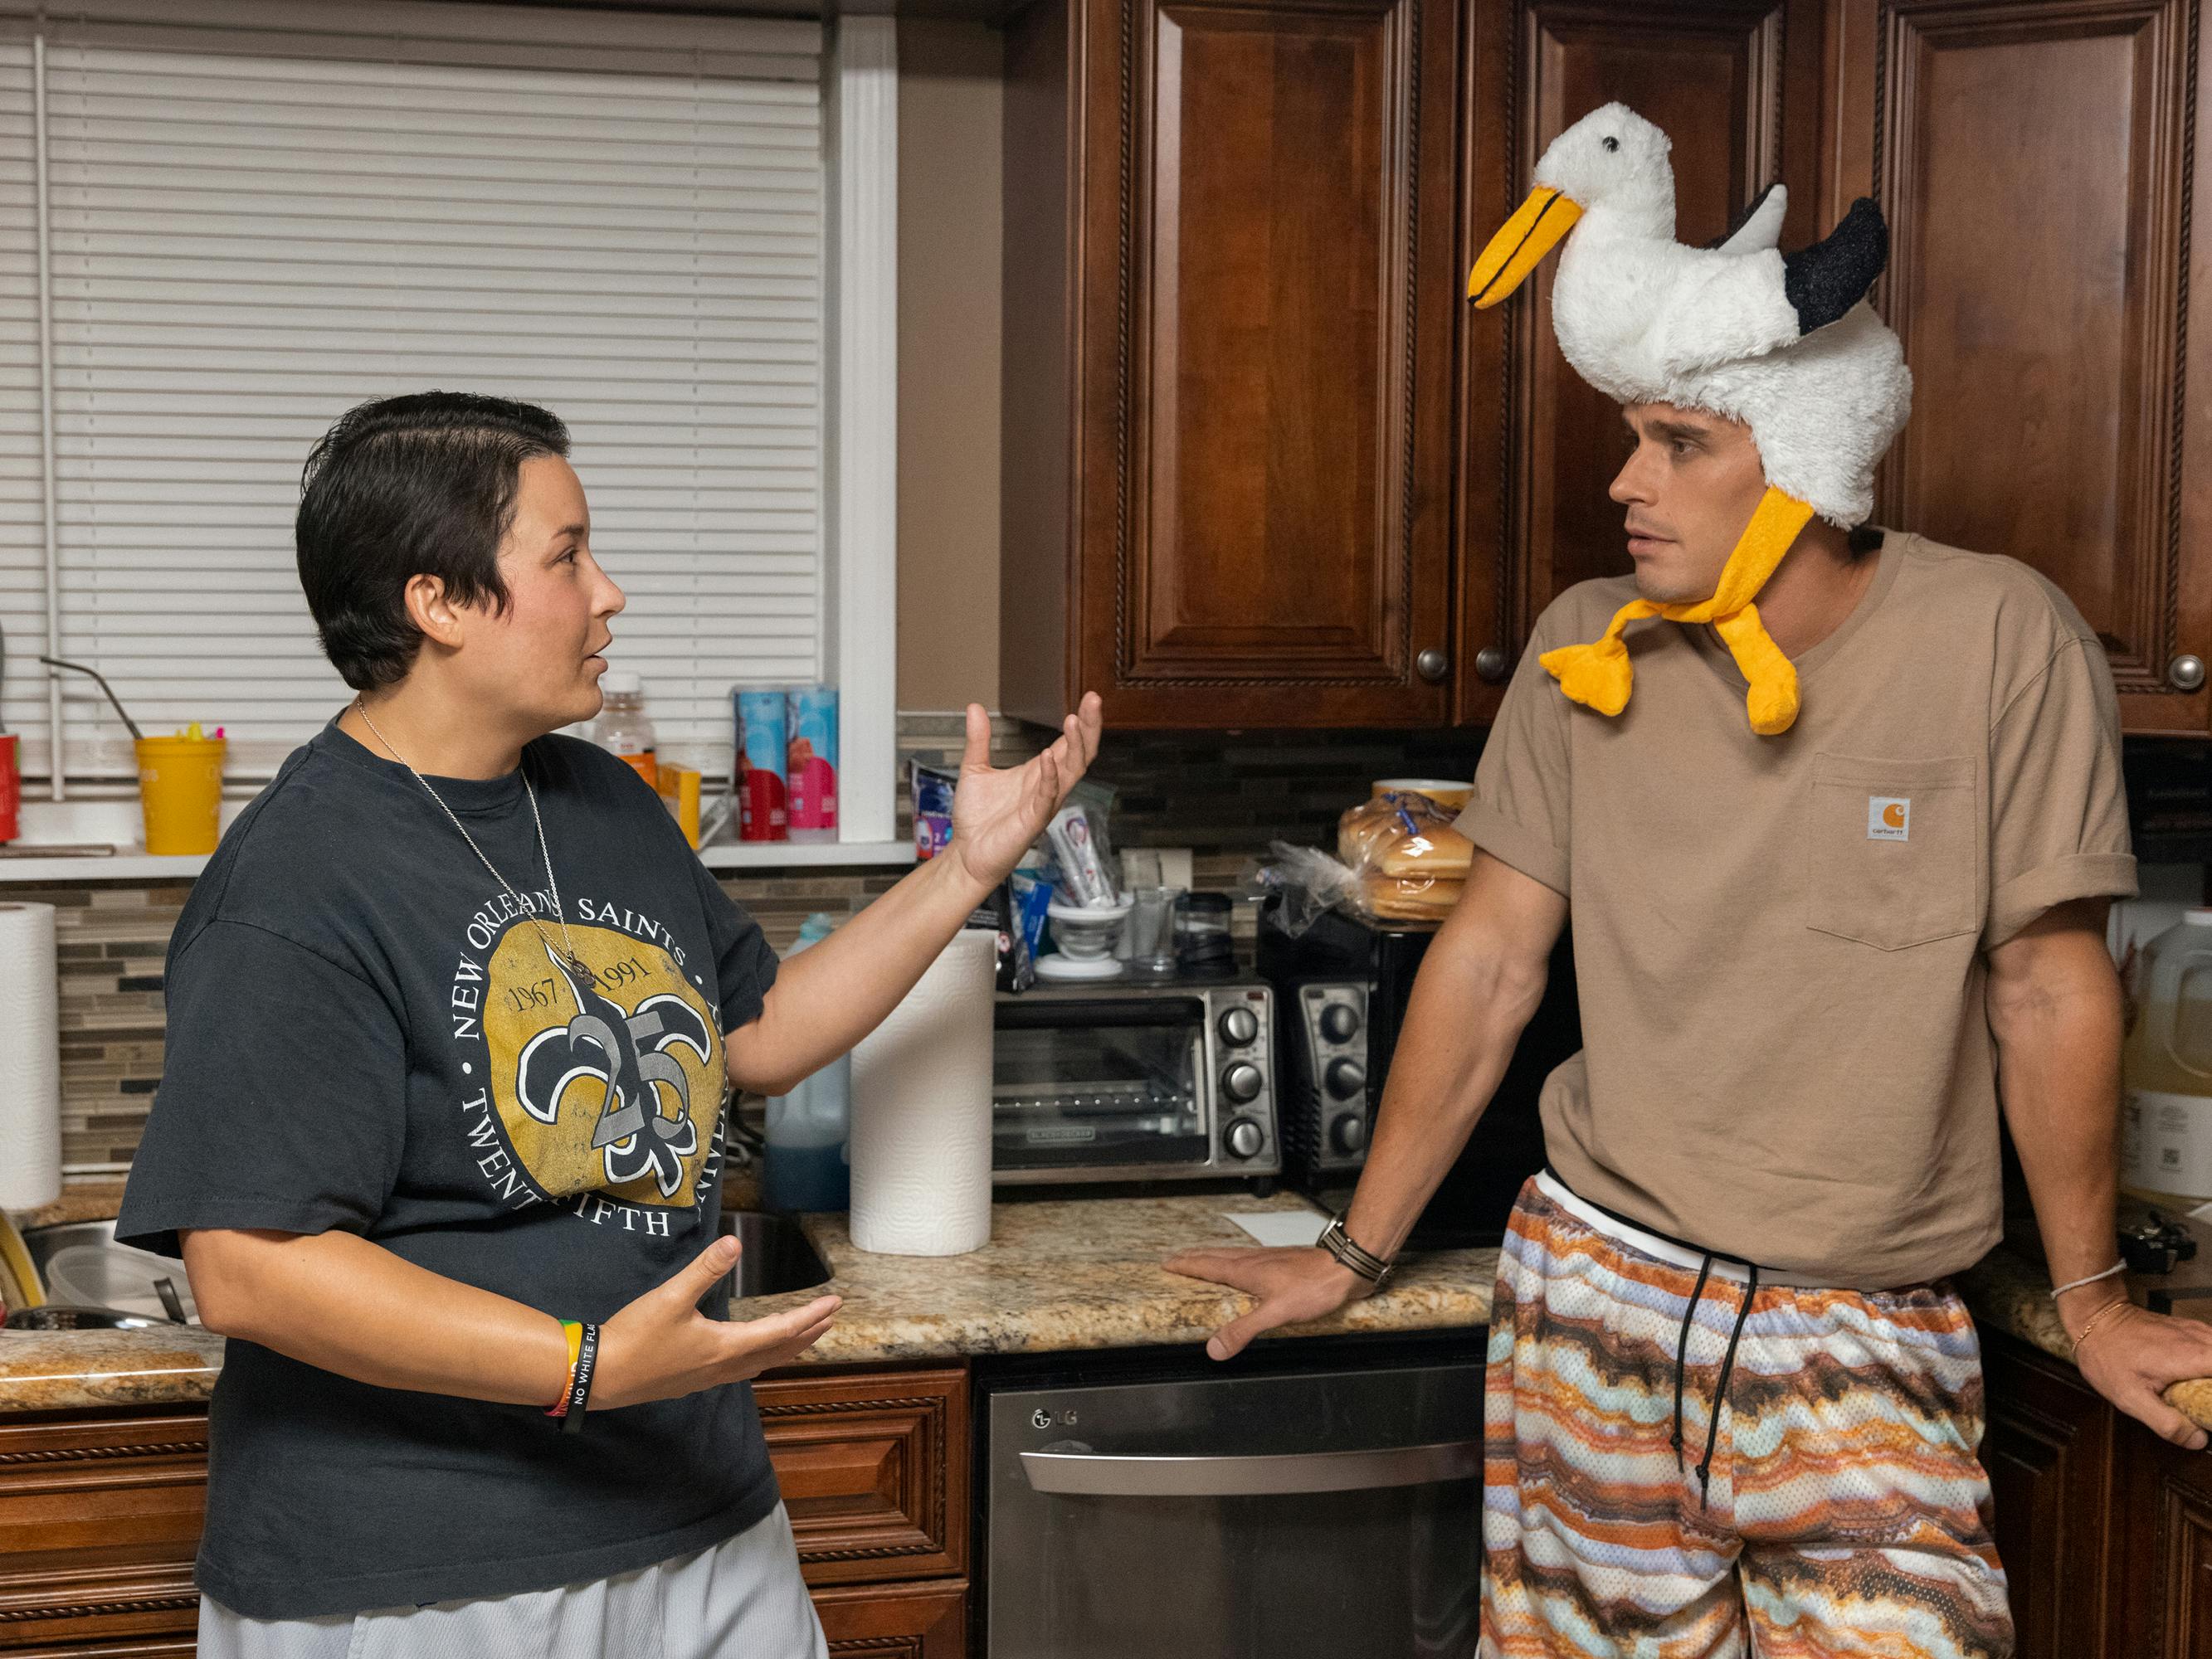 Stephanie and Antoni stand in the kitchen together. Stephanie wears a Saints shirt and grey shorts, and Antoni wears patterned shorts and a Carhartt t-shirt. His most notable sartorial choice is the seagull hat he wears. I wonder what the story behind that is.